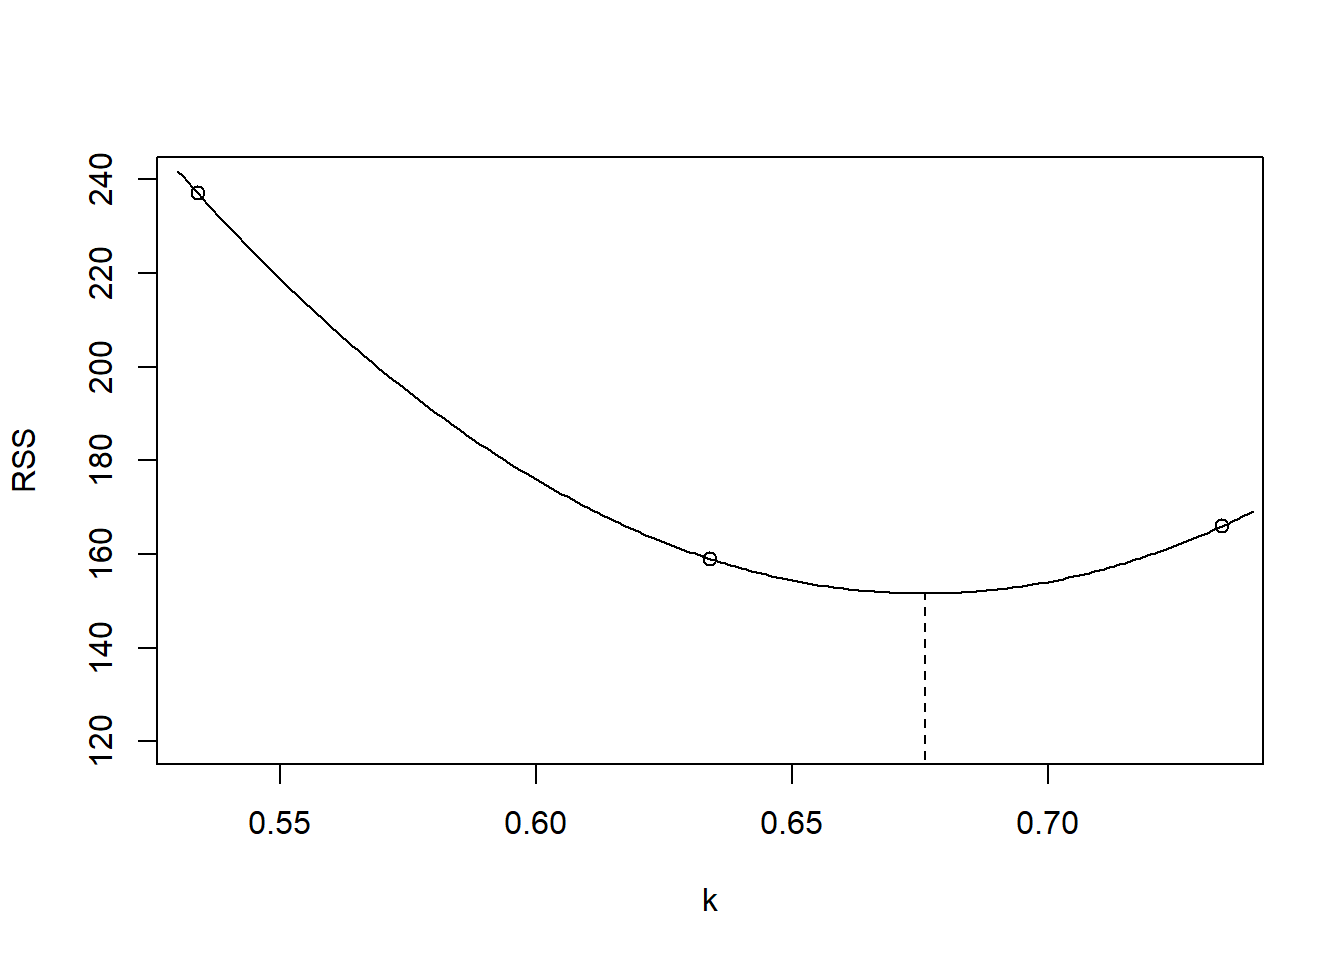 Finding the optimal value for *k*. 